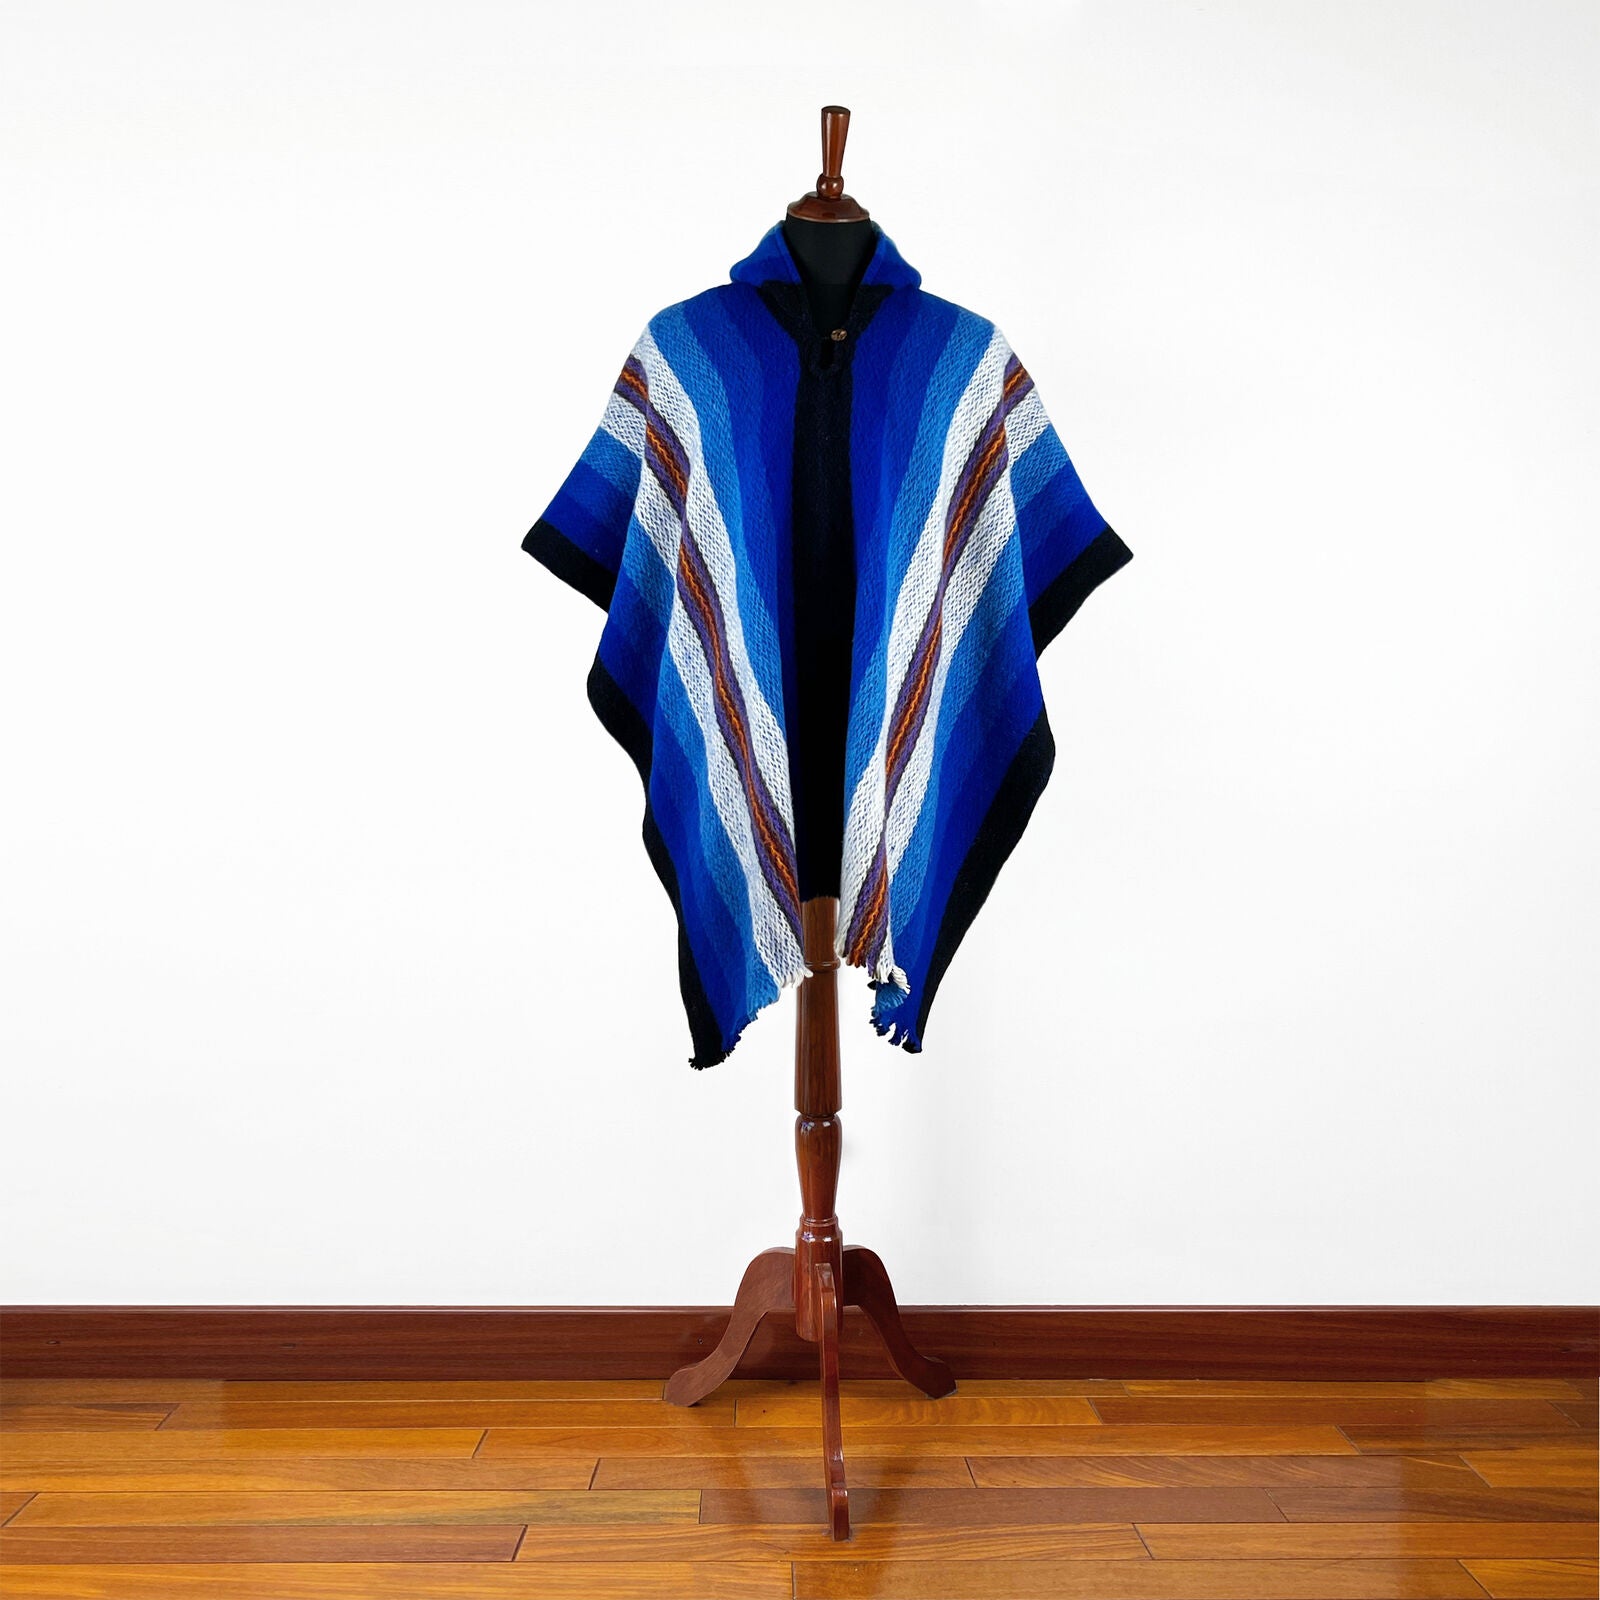 Wuachapa - Llama Wool Unisex South American Handwoven Hooded Poncho - adults/kids sizes - turquoise blue striped pattern